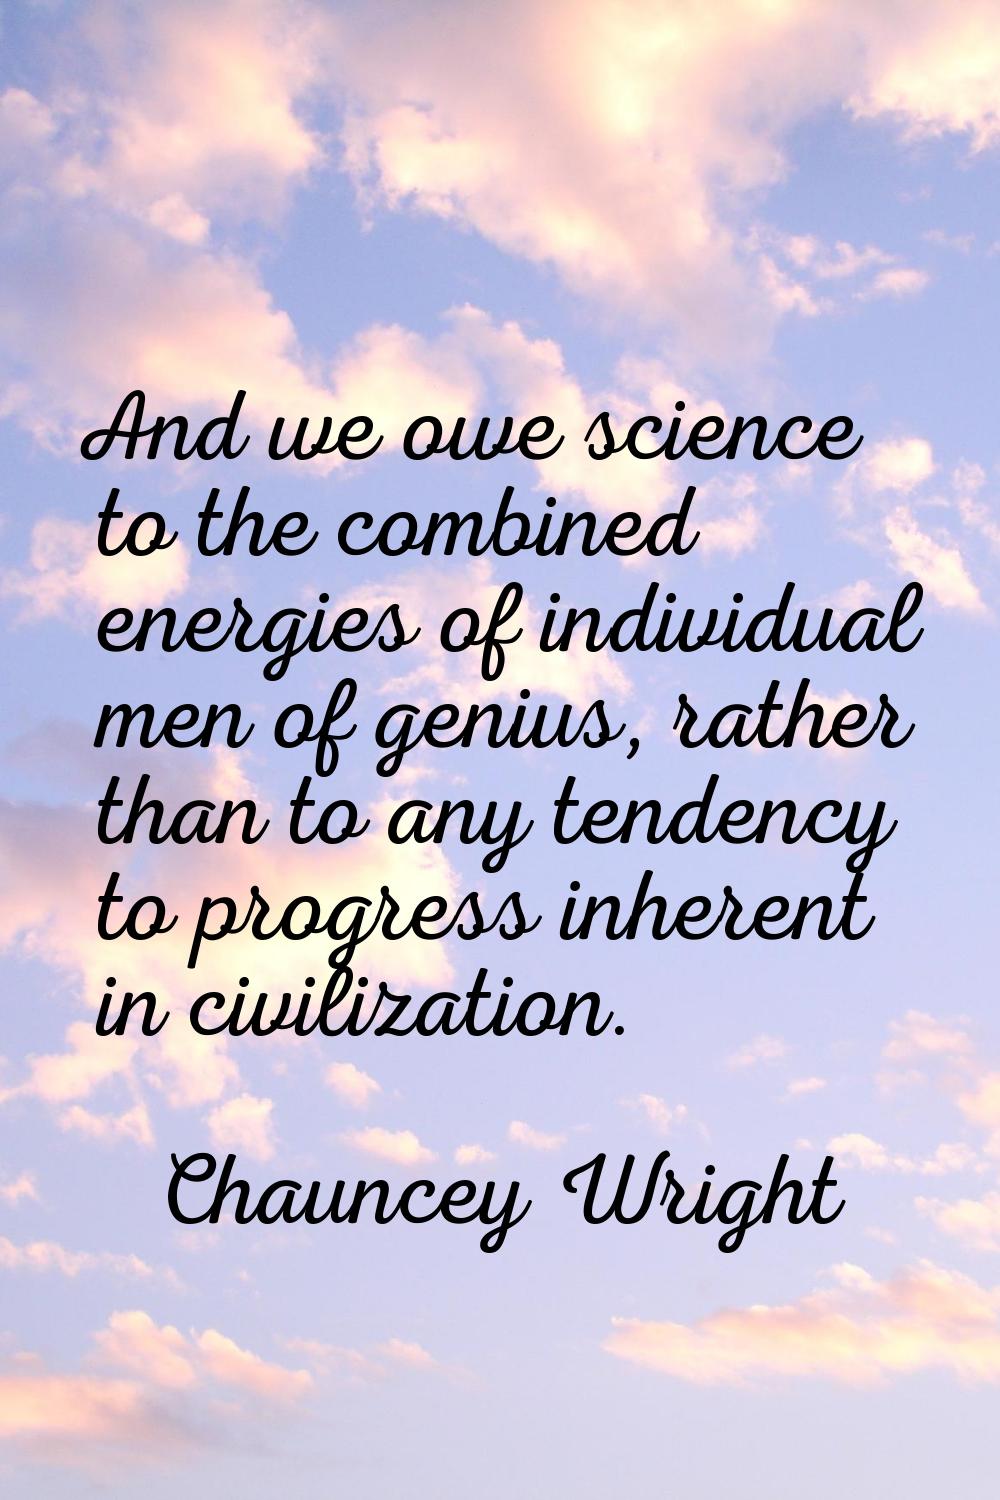 And we owe science to the combined energies of individual men of genius, rather than to any tendenc